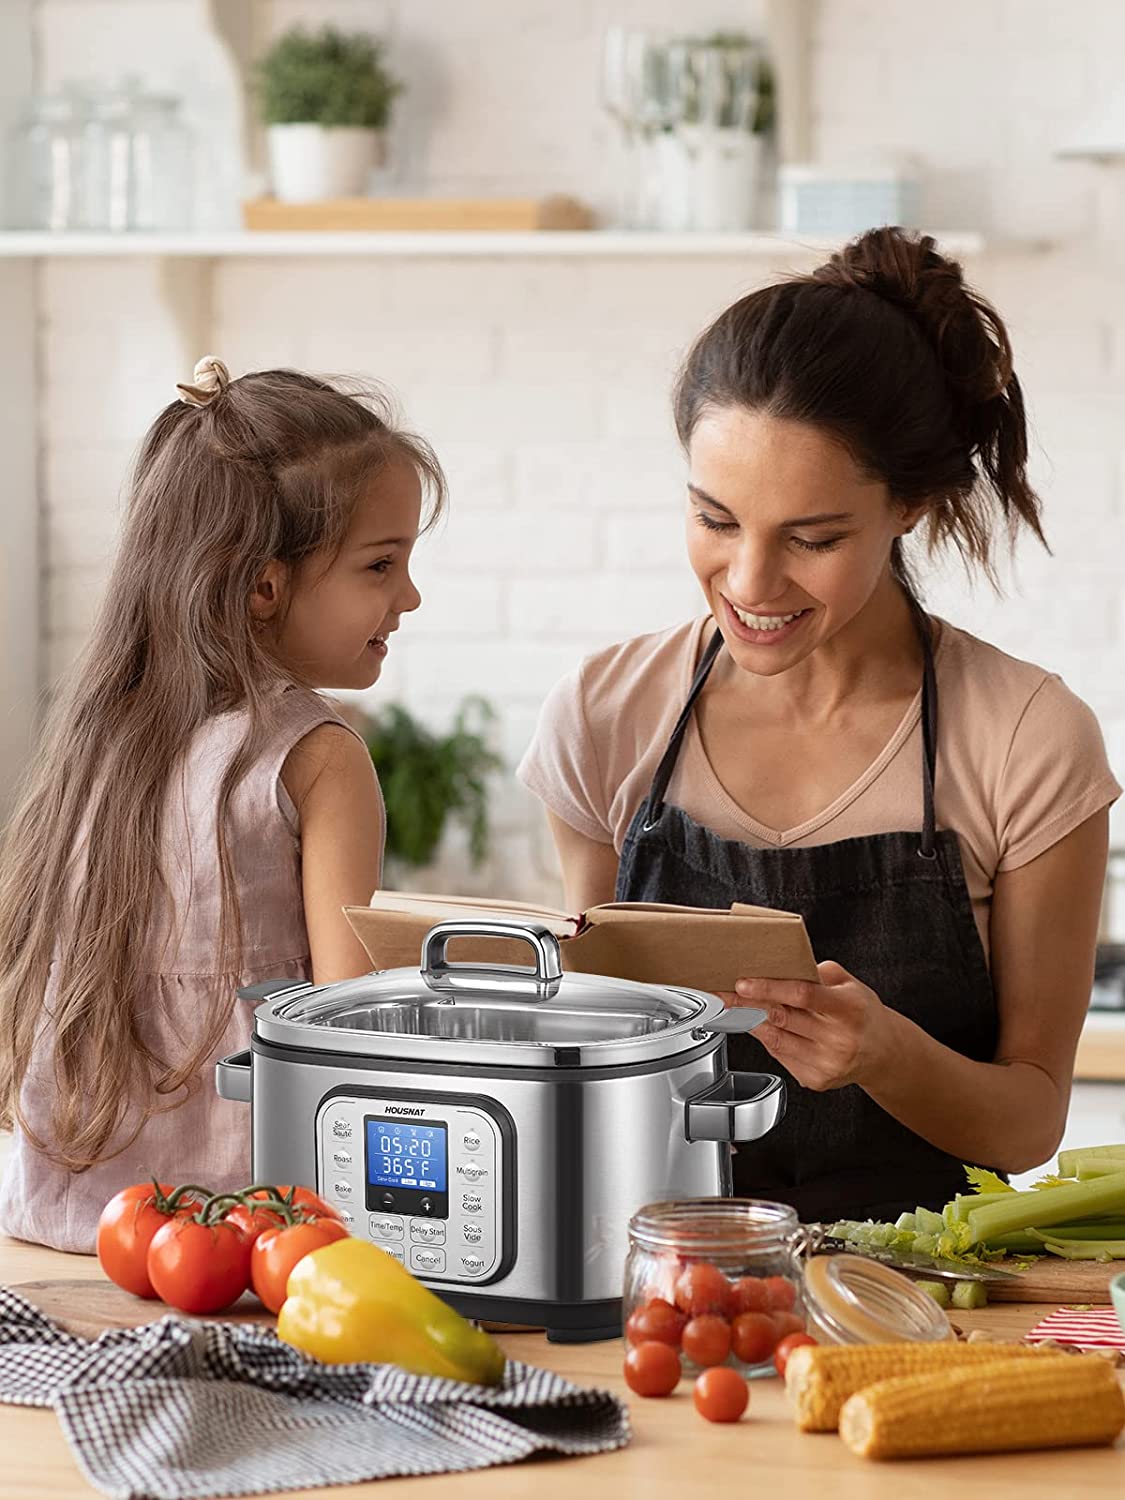 Slow Cooker, HOUSNAT 10 in 1 Programmable Cooker, 6Qt Stainless Steel, Rice Cooker, Yogurt Maker, Delay Start, Steaming Rack and Glass Lid, Adjustable Temp&Time for Slow Cook with Digital Timer